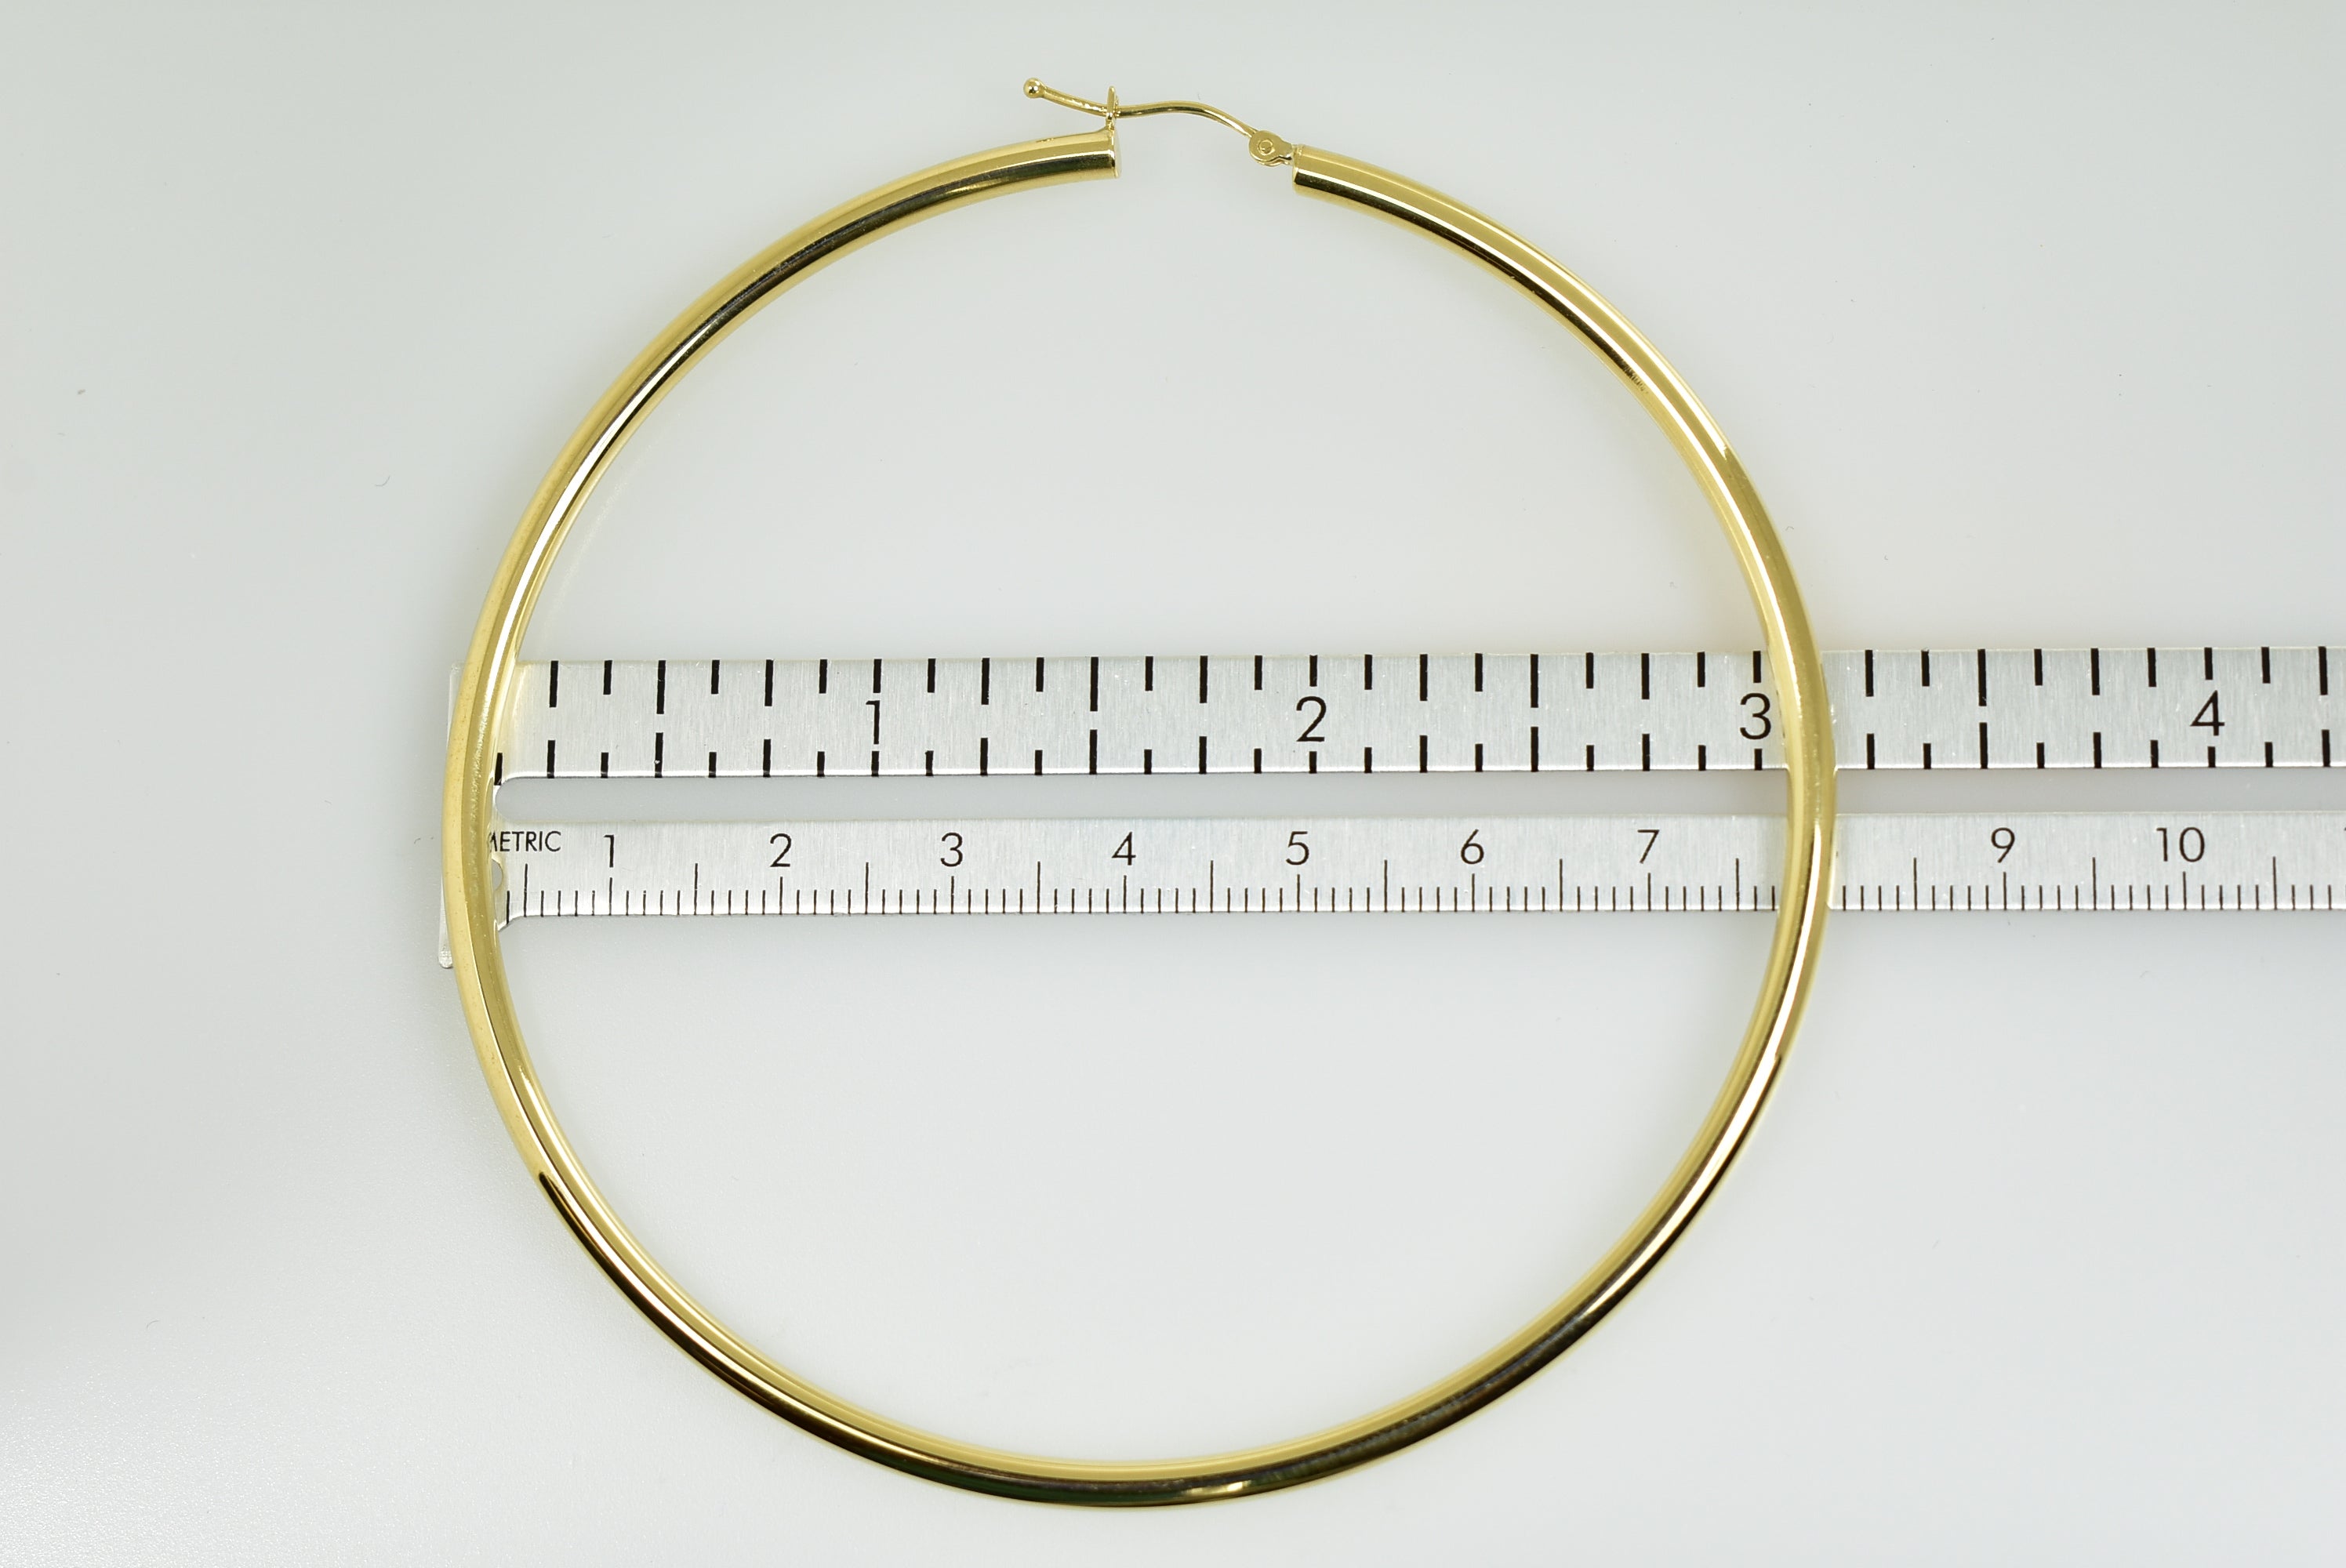 14K Yellow Gold 3 inch Diameter Extra Large Giant Gigantic Round Classic Hoop Earrings Lightweight 78mm x 3mm